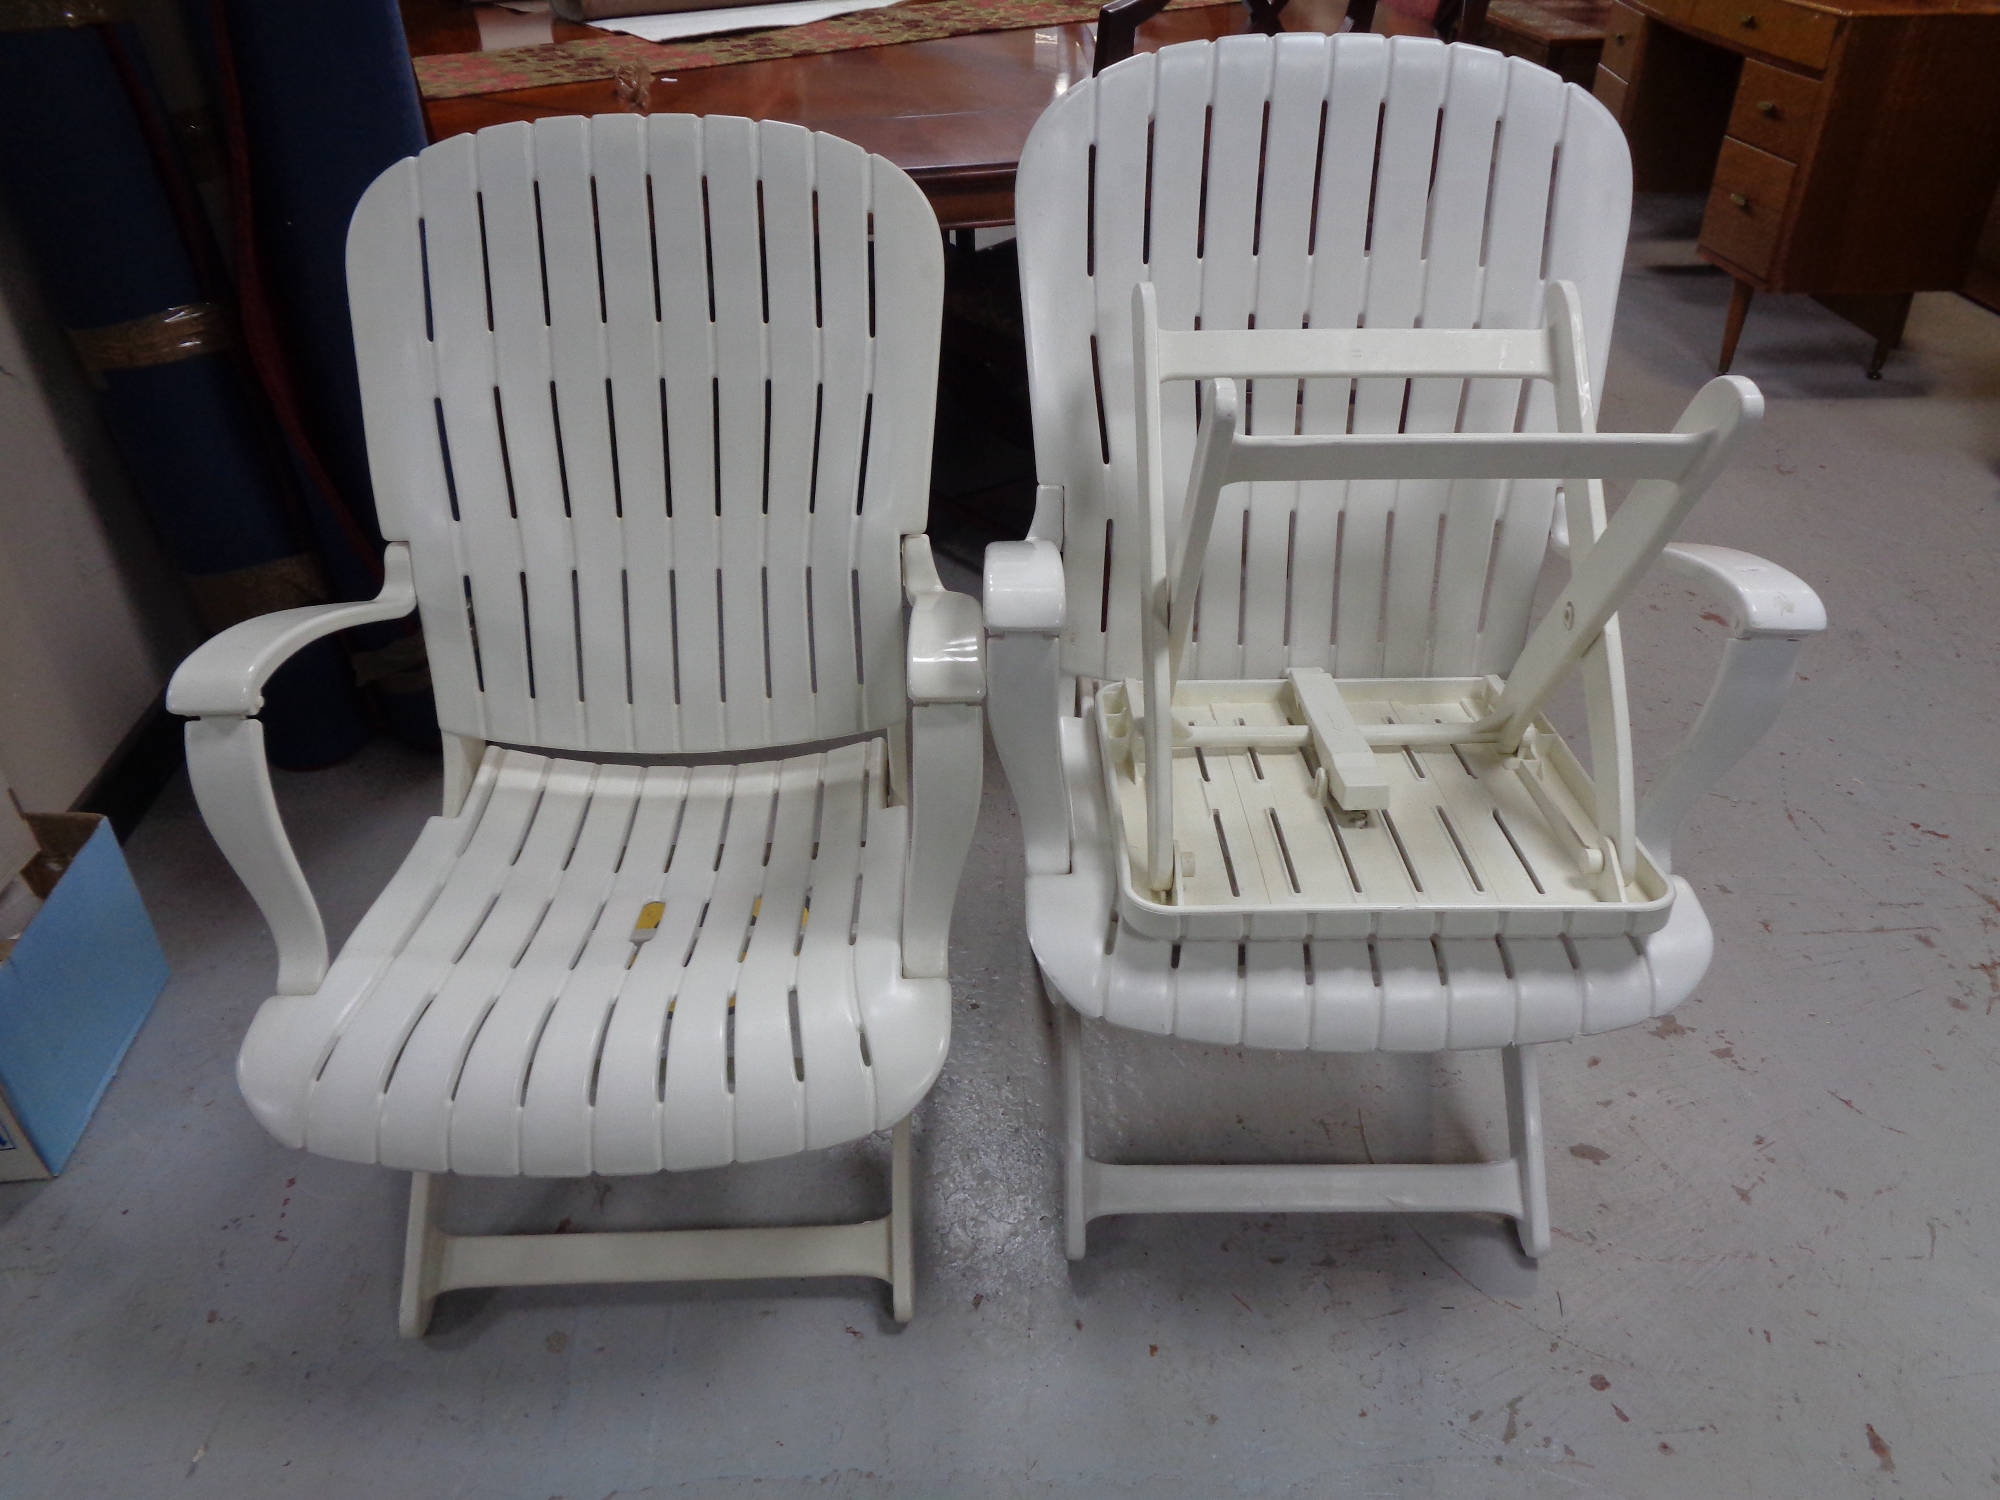 A pair of plastic garden armchairs and matching side table